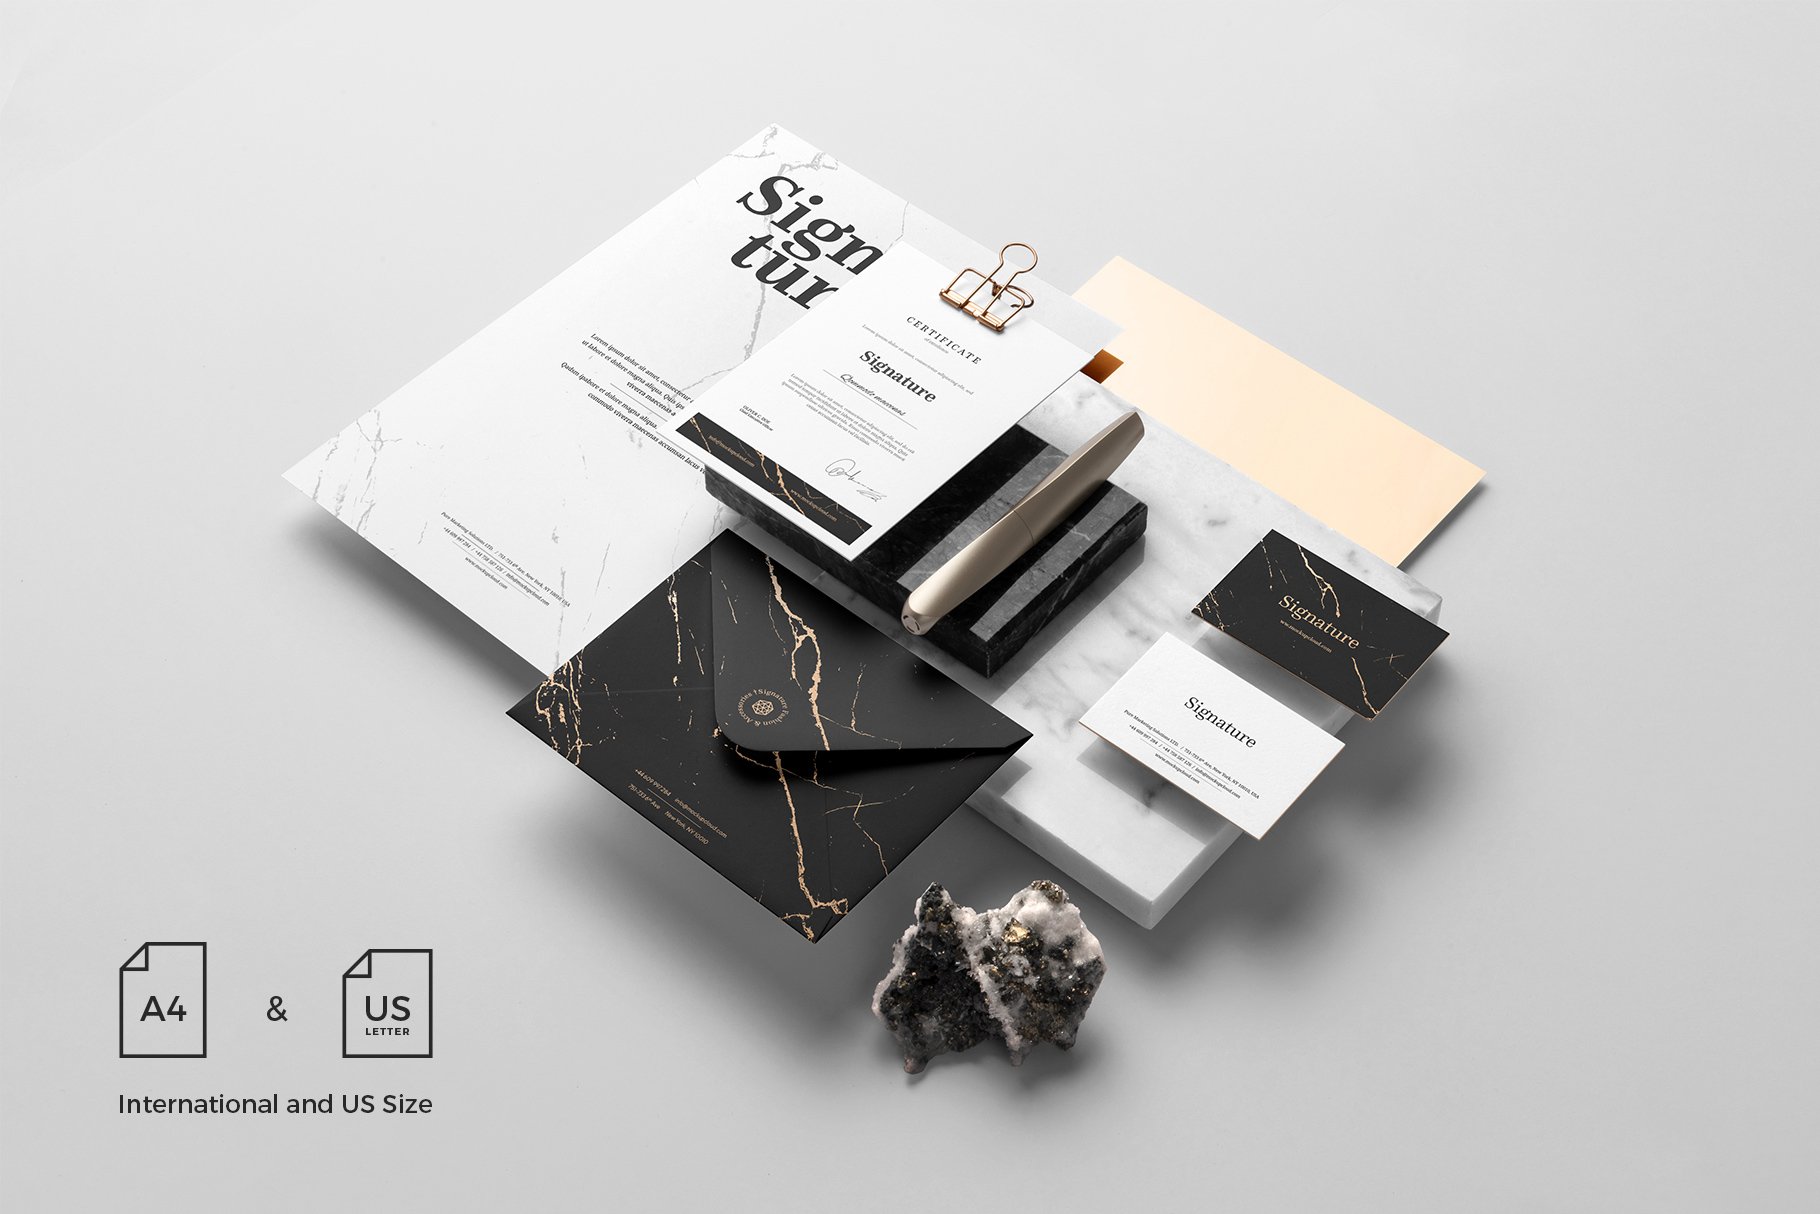 Download 10 awesome stationery branding mockup